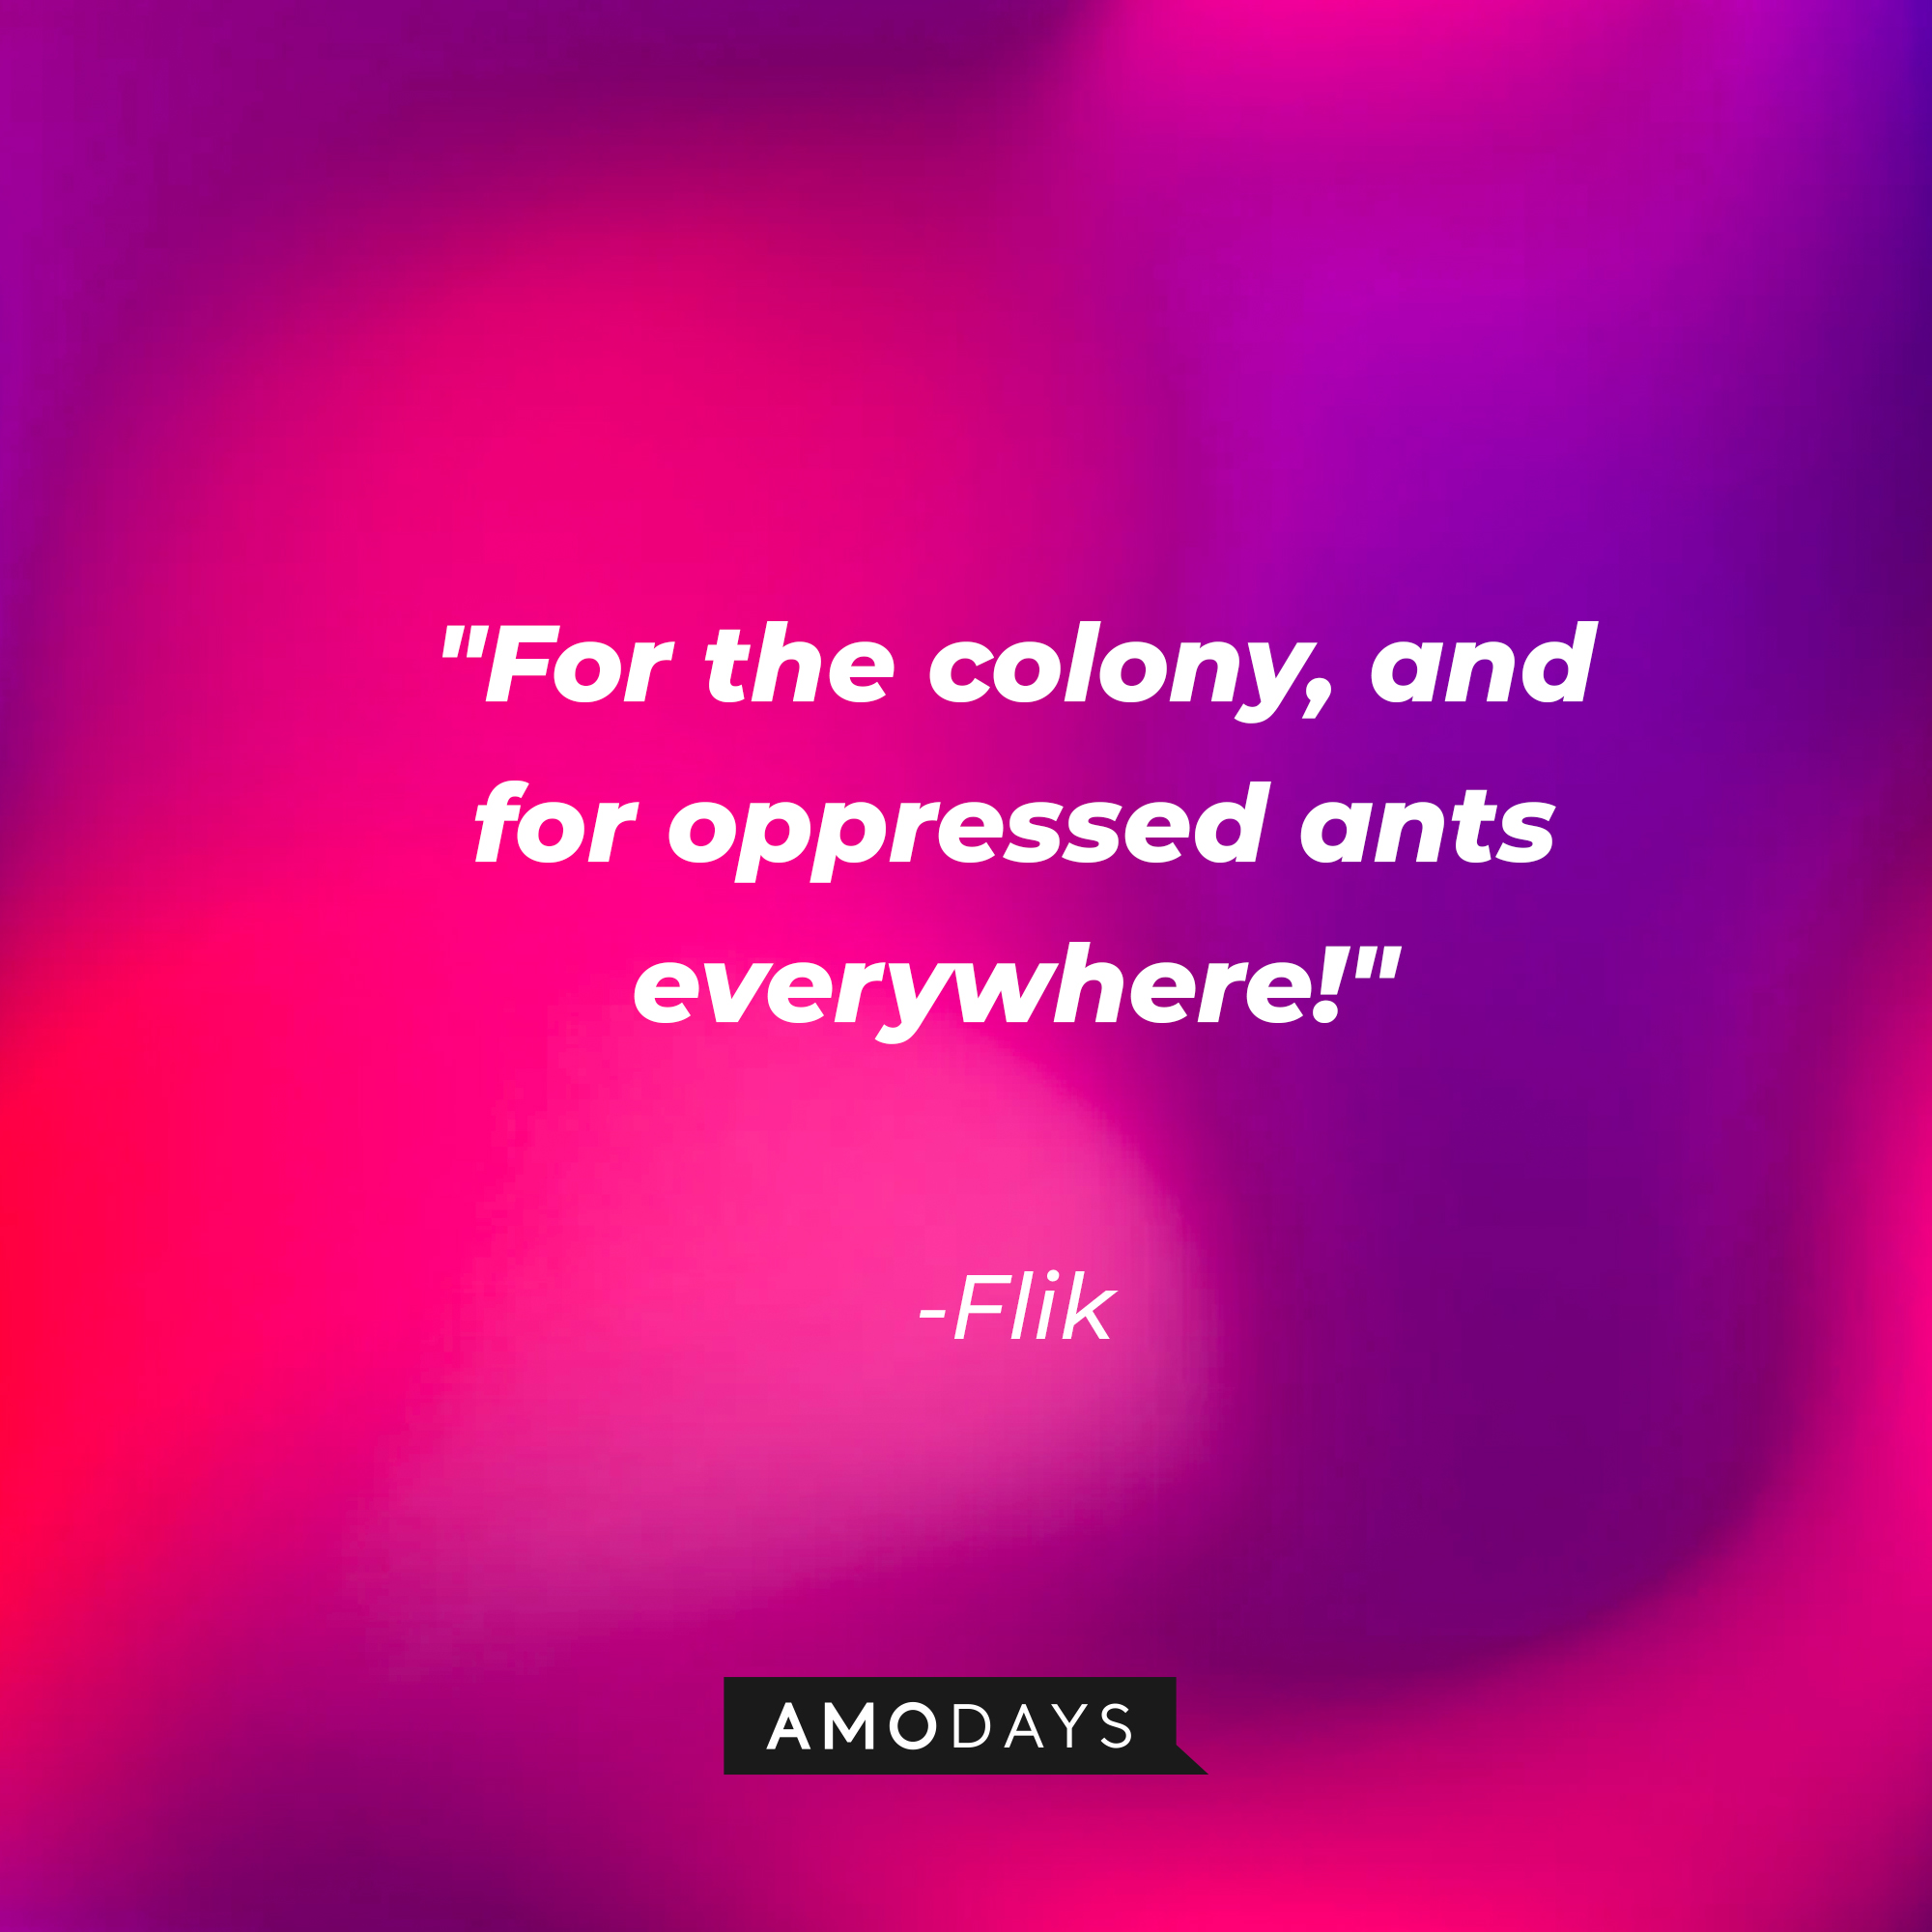 Flik's quote: "For the colony, and for oppressed ants everywhere!" | Source: AmoDays